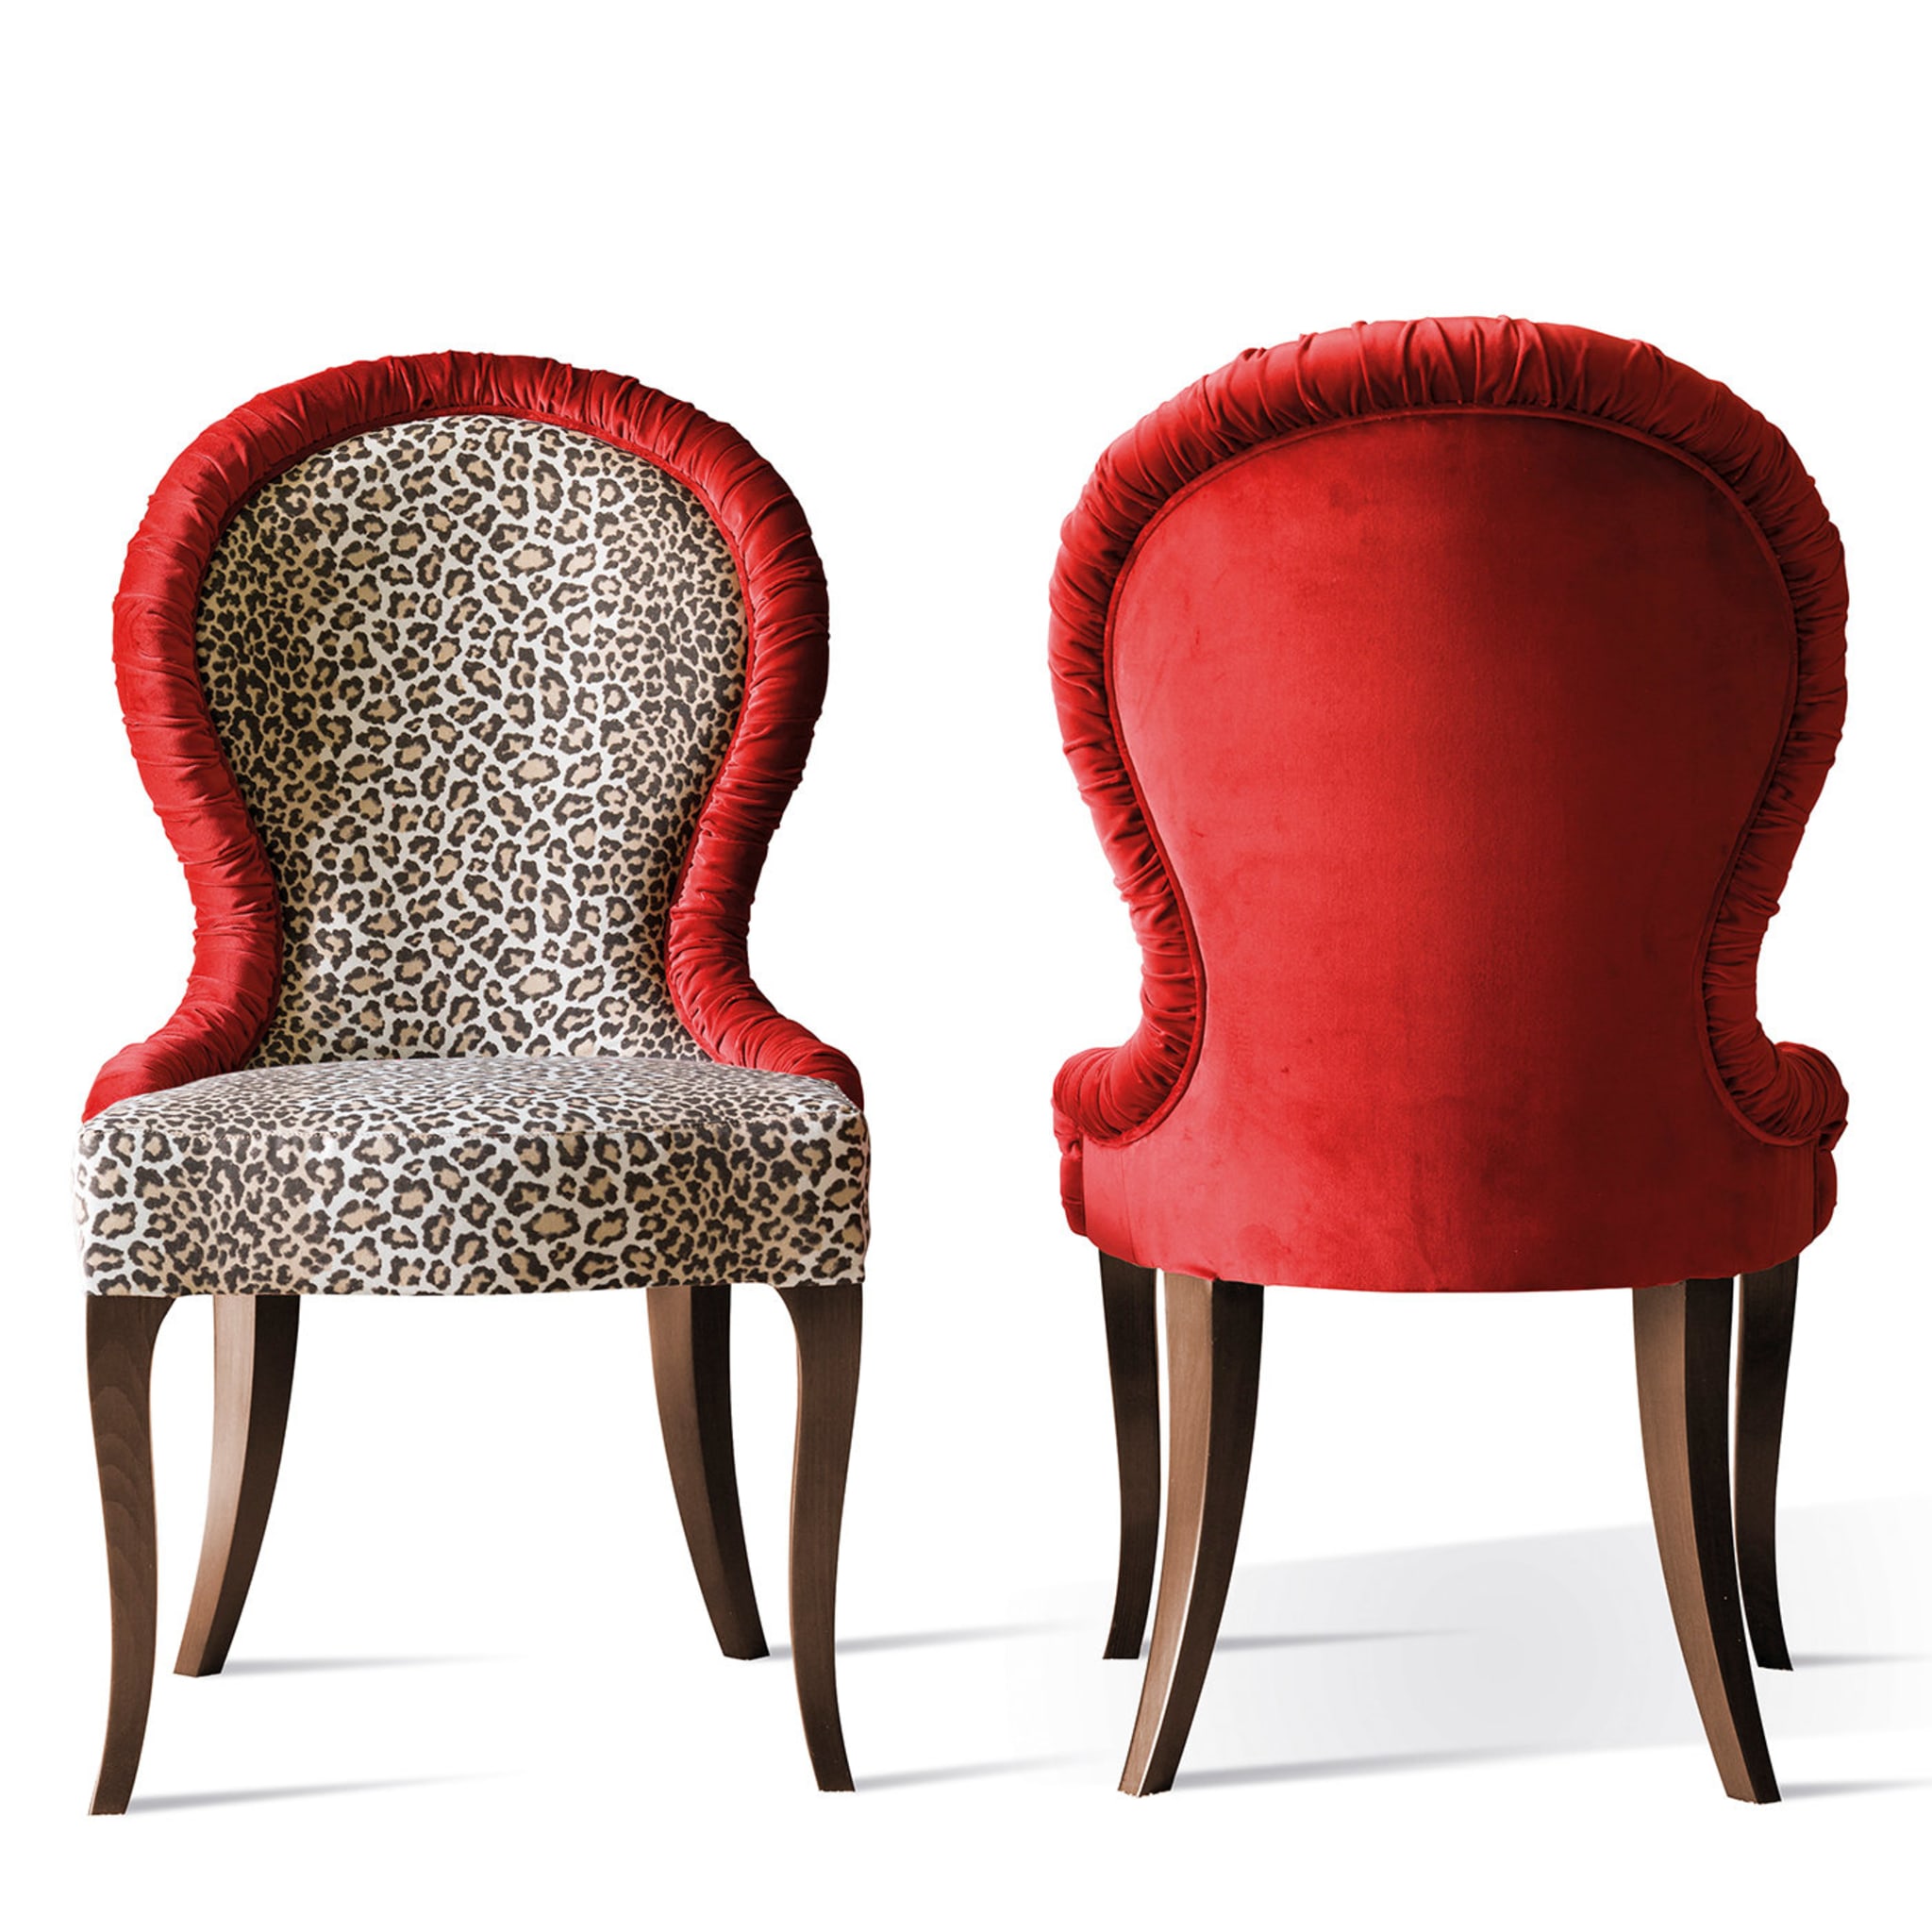 Julie Red Dining Chair - Alternative view 1